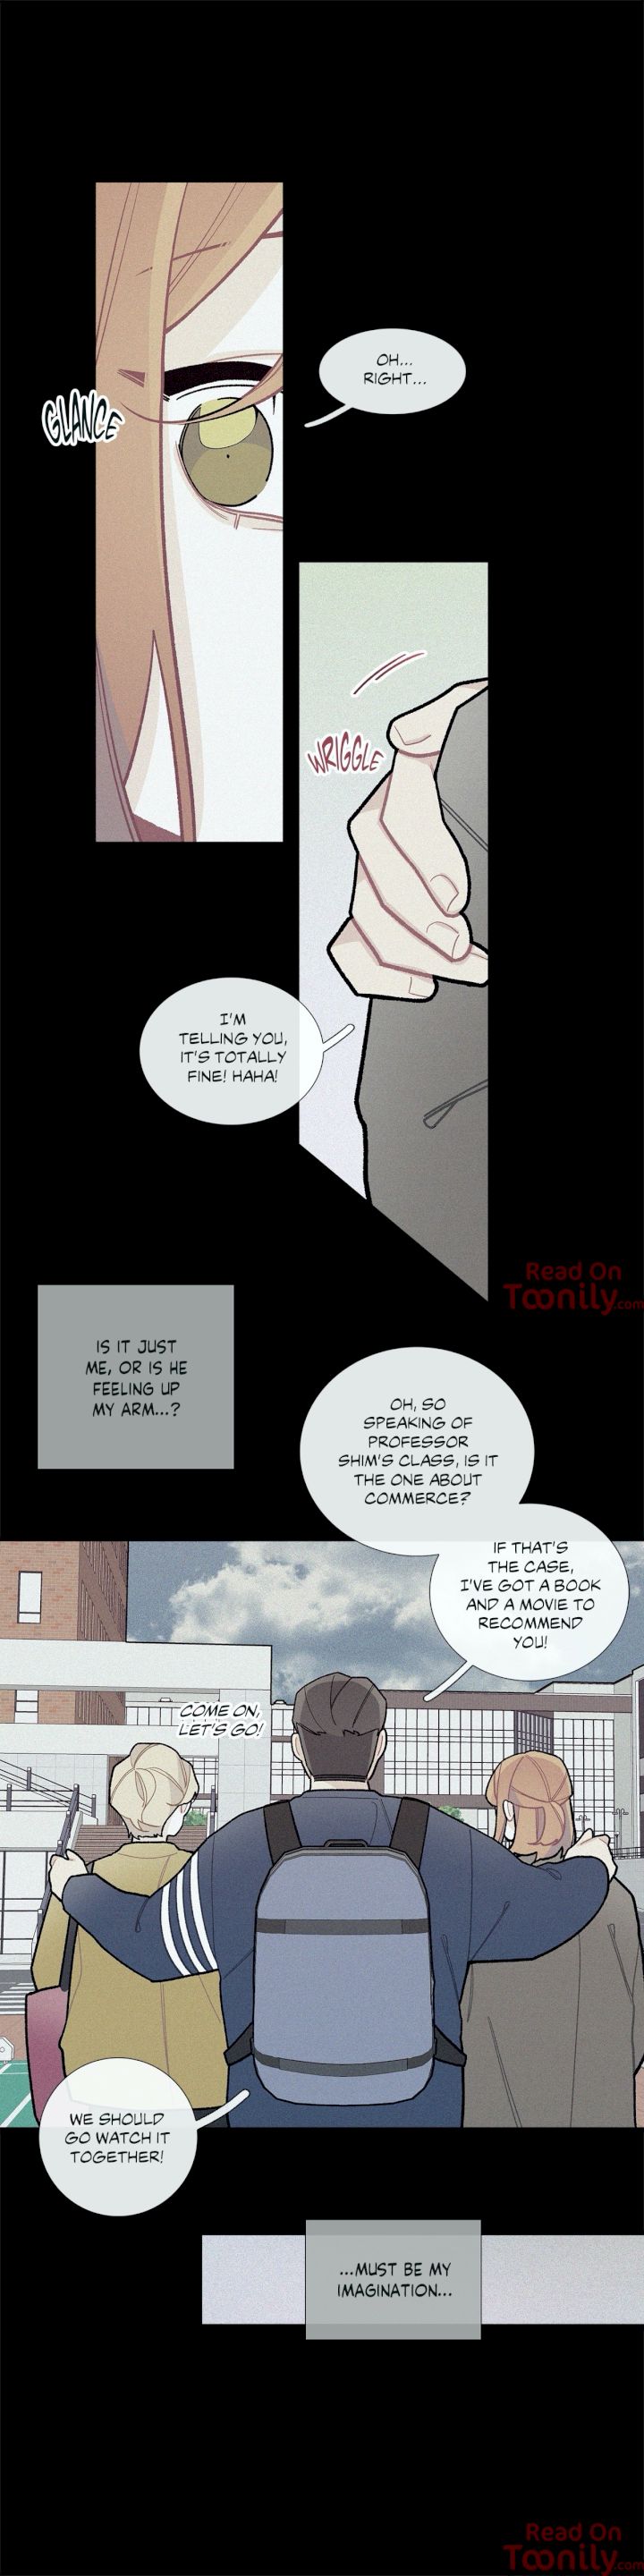 What’s Going On? - Chapter 55 Page 5